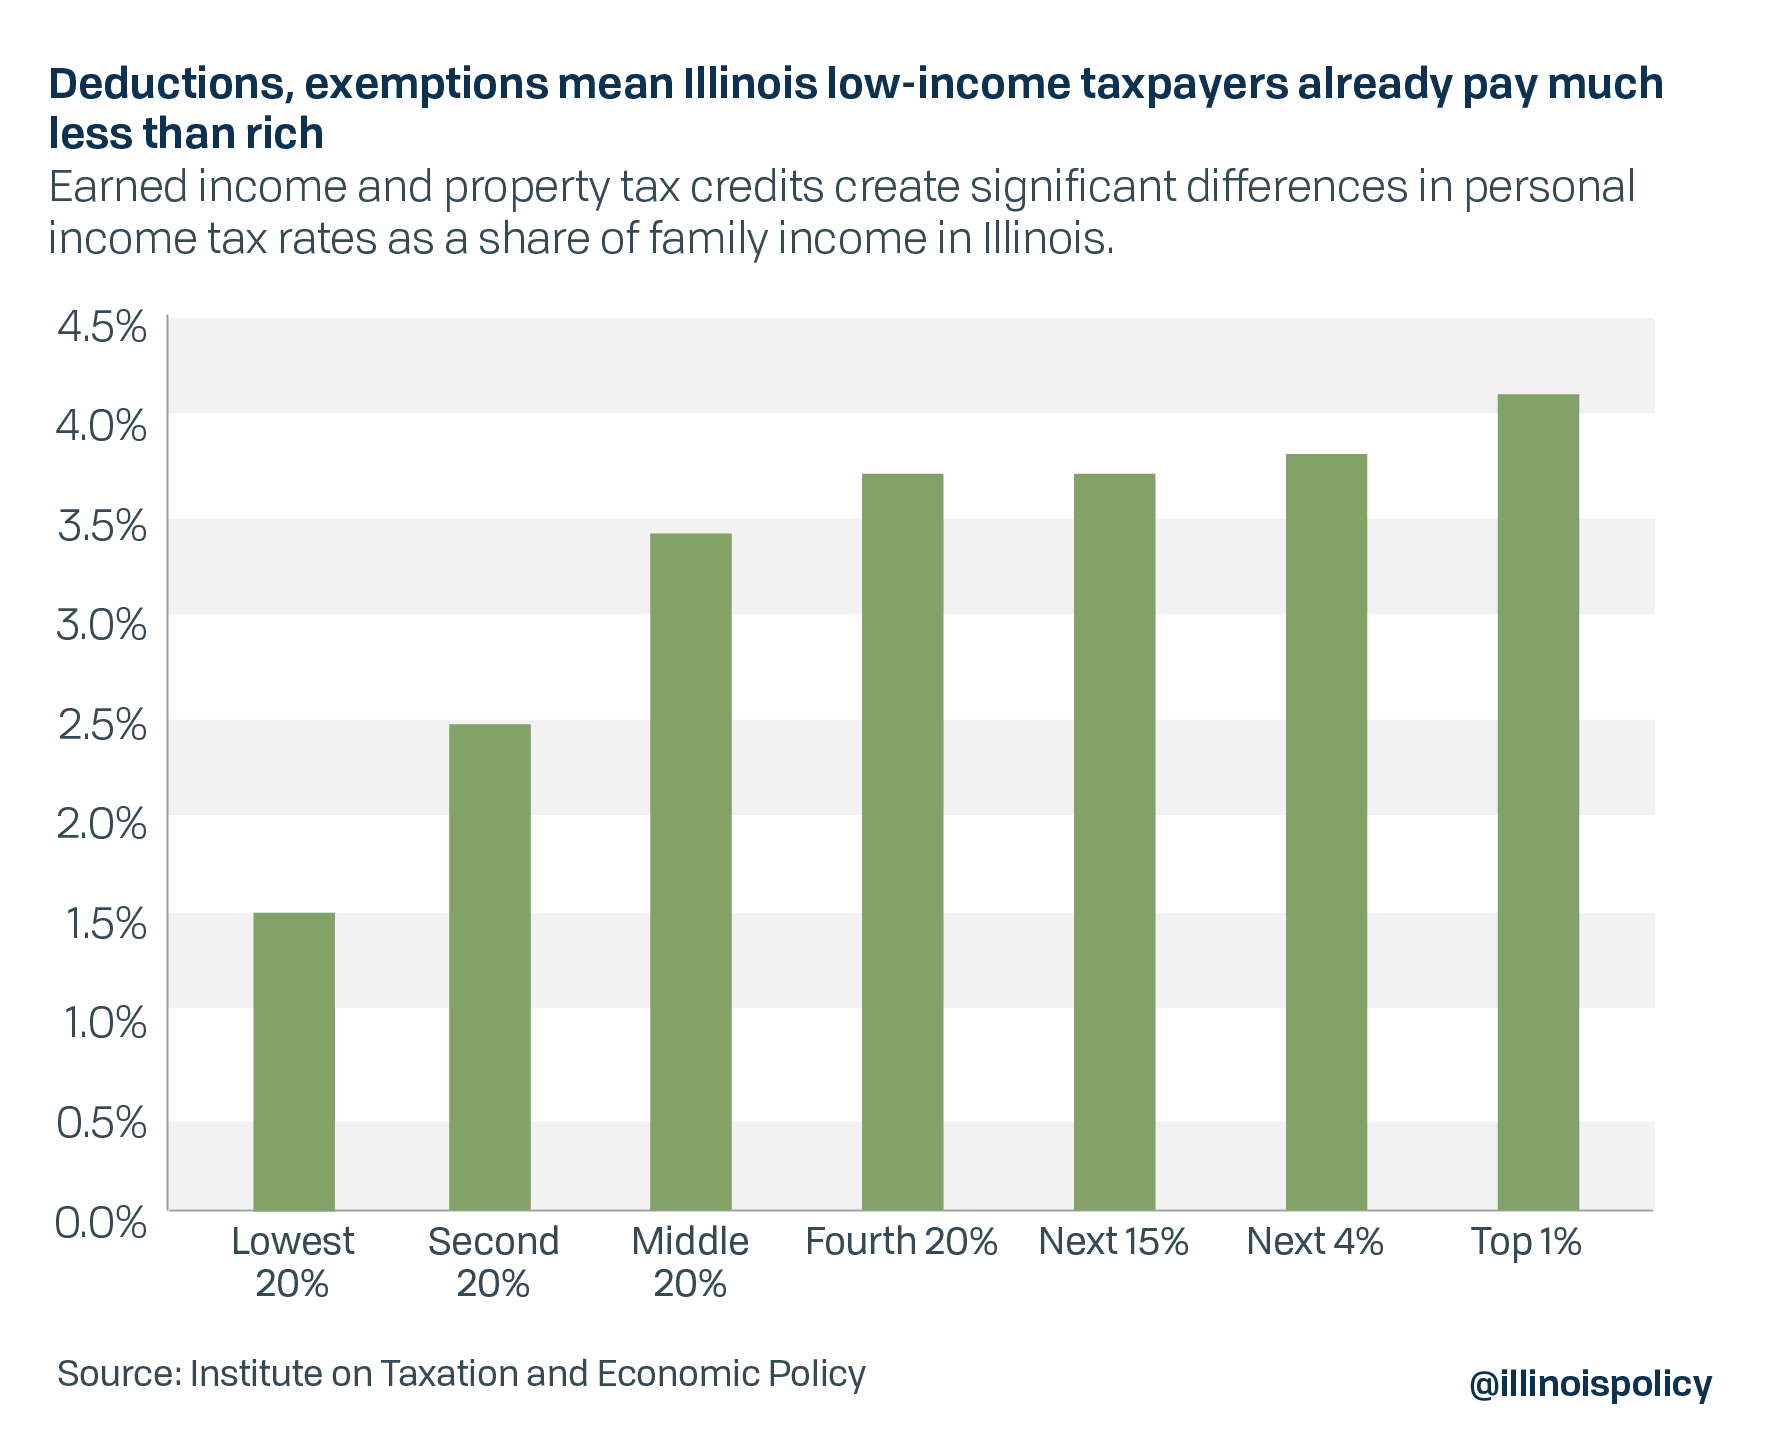 exemptions-and-deductions-give-low-income-illinoisans-less-than-half